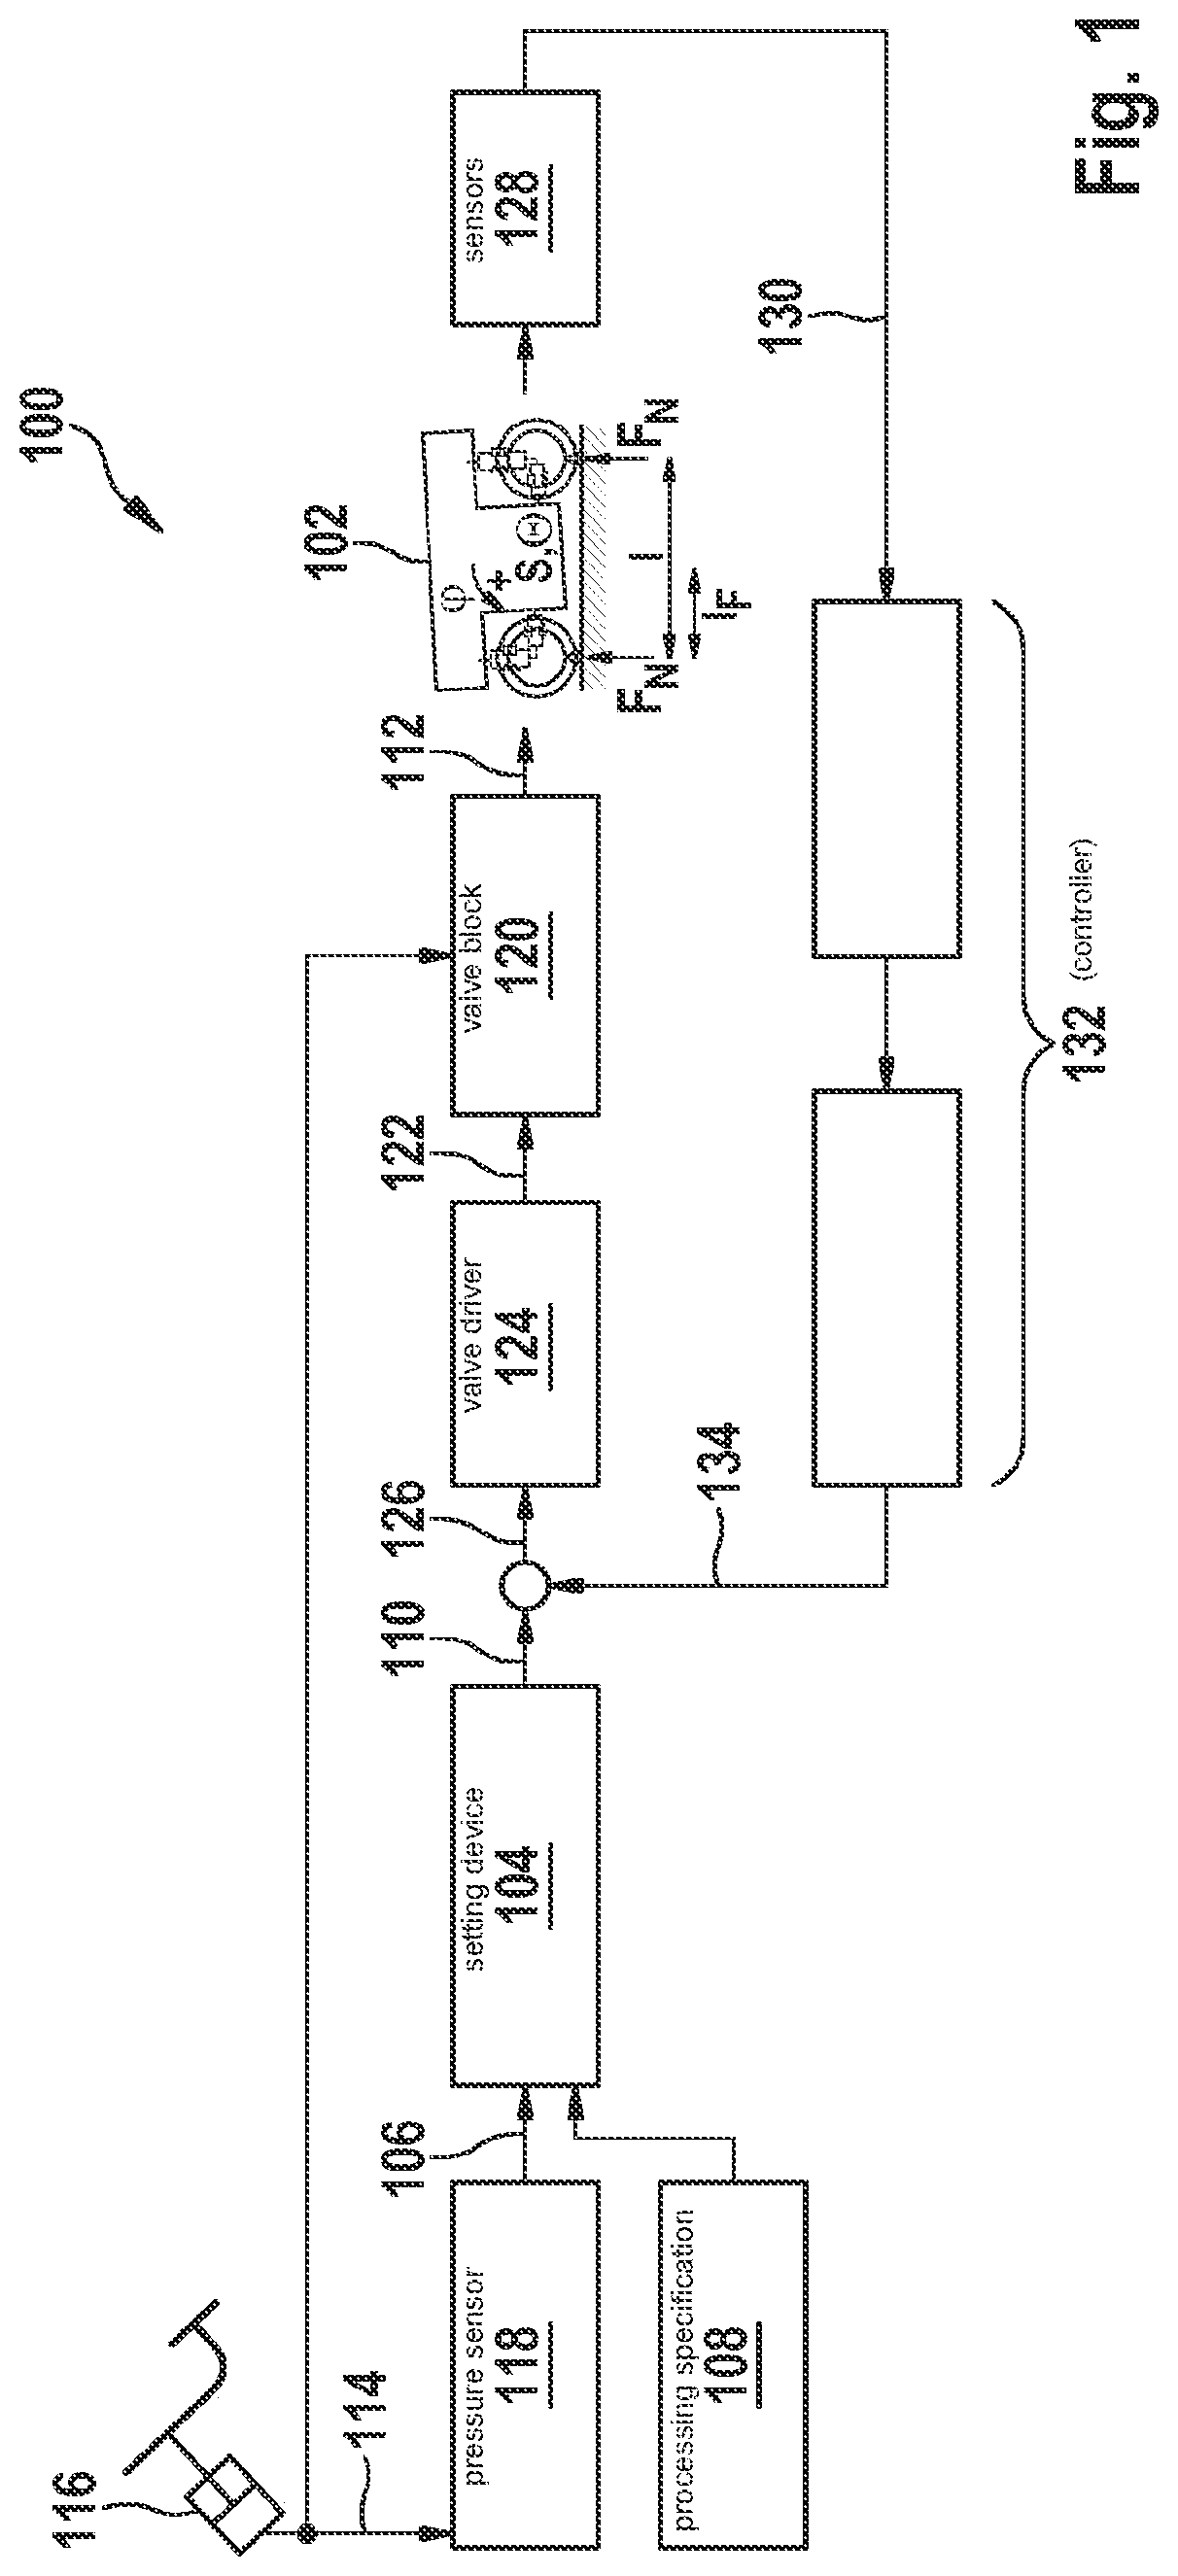 Method for operating a brake system, and brake system